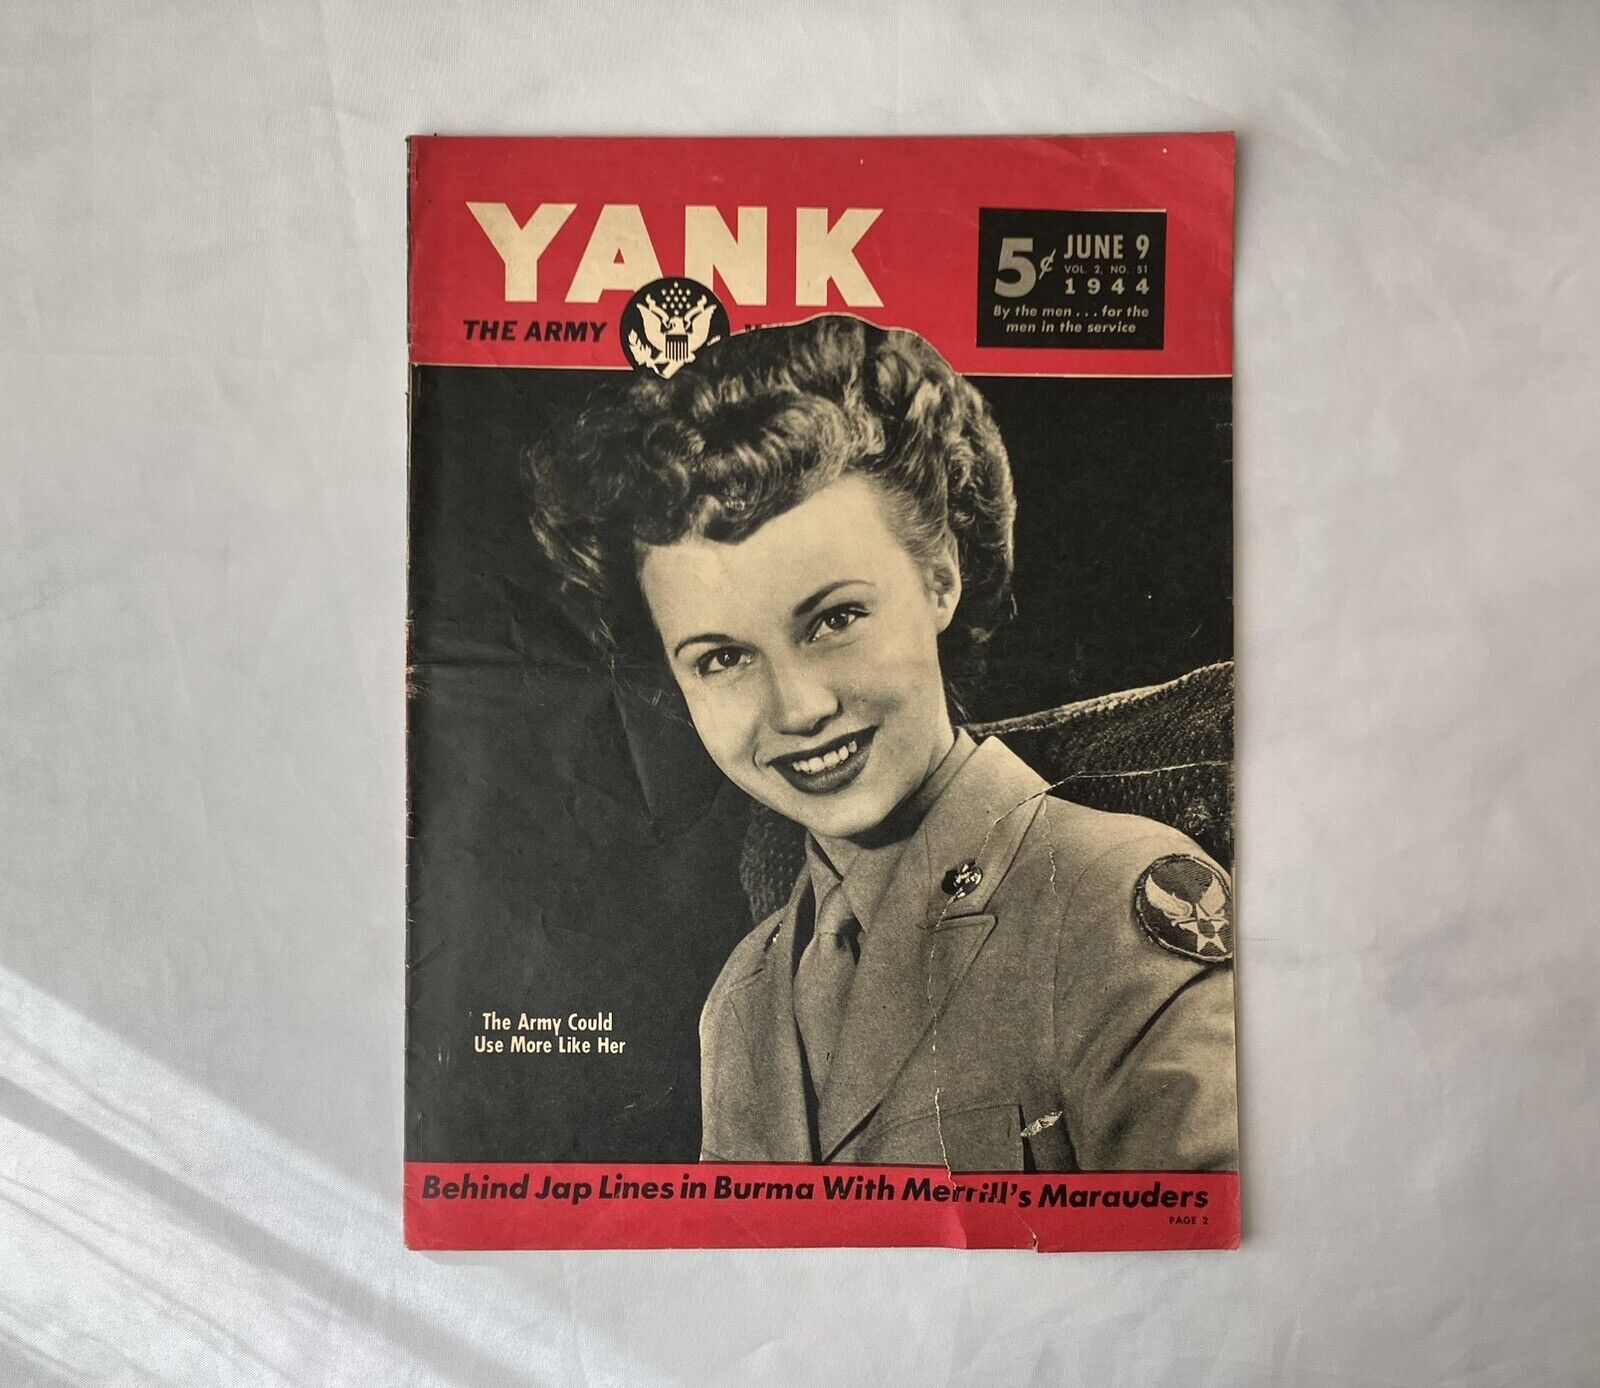 WWII Yank The Army Weekly Magazine, June 9, 1944, Vol. 2, No. 51